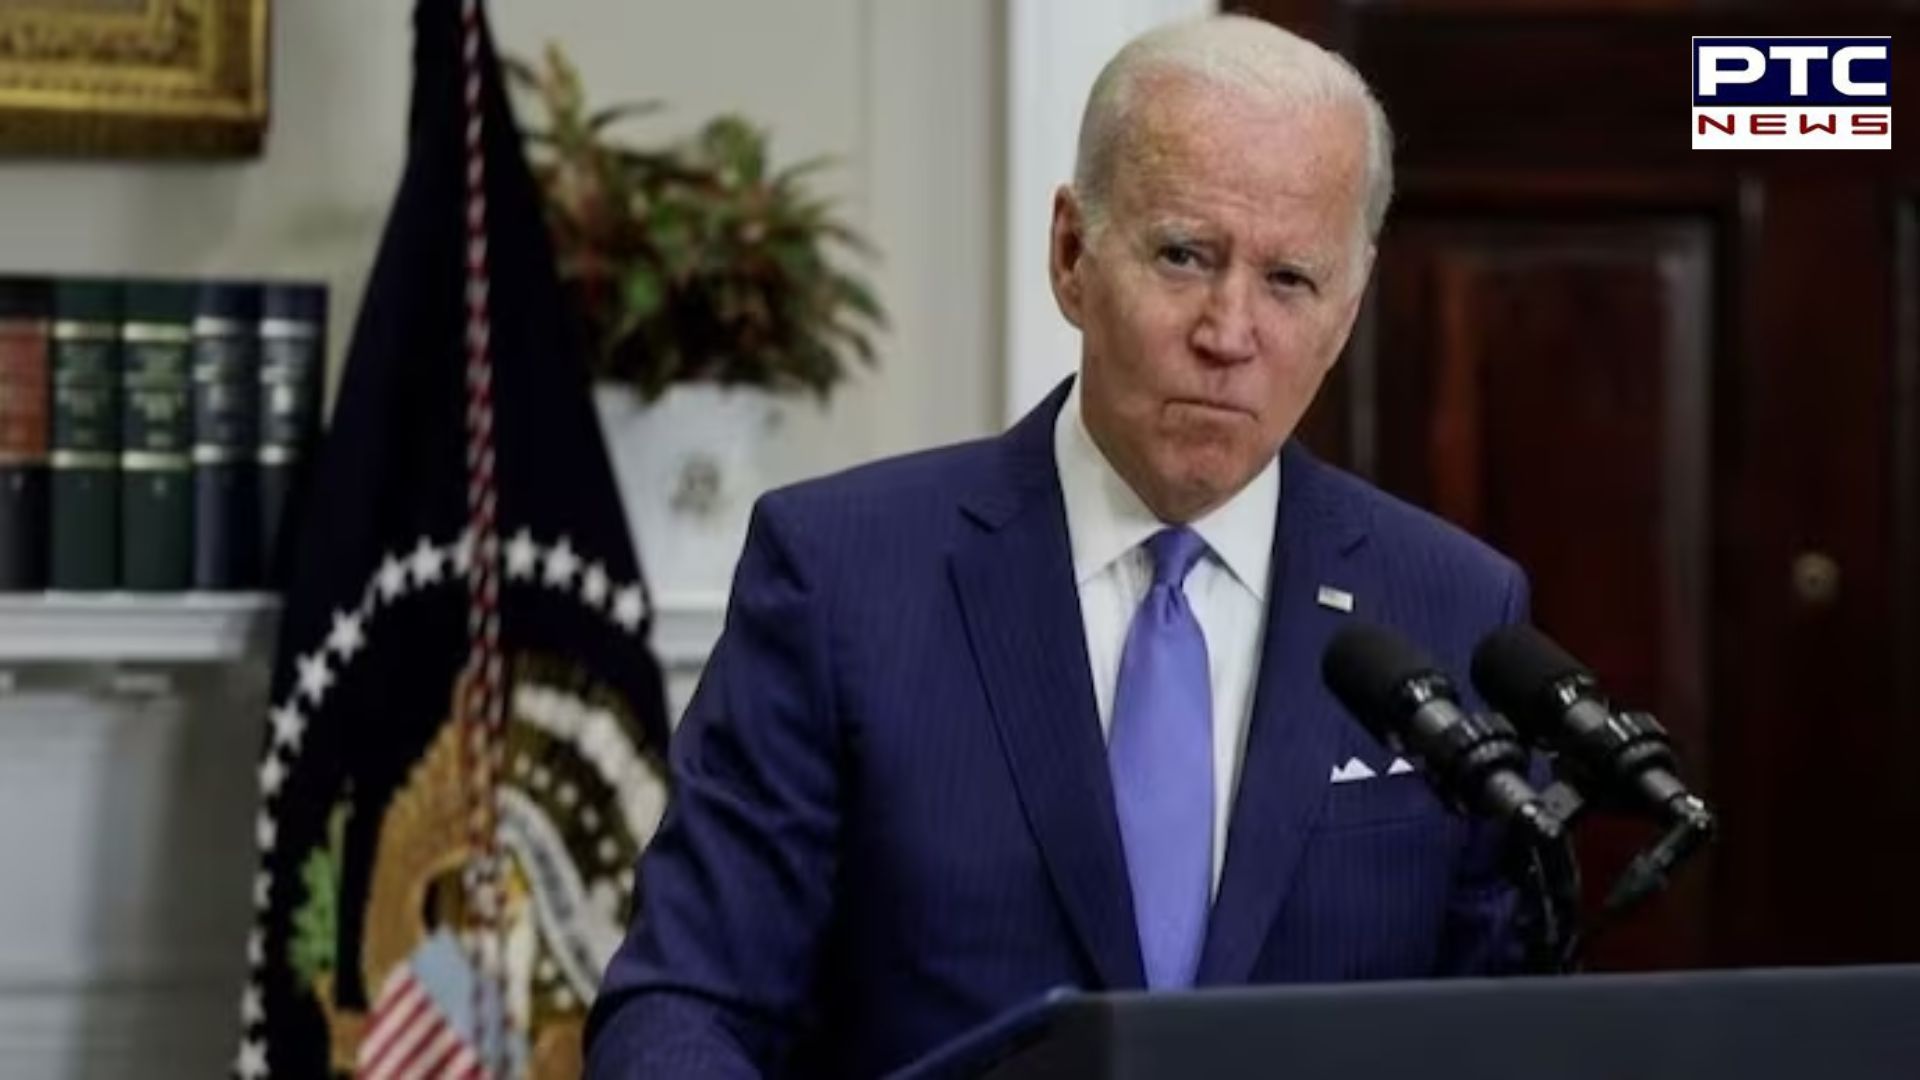 Biden secures spot in US Presidential elections, Trump close behind